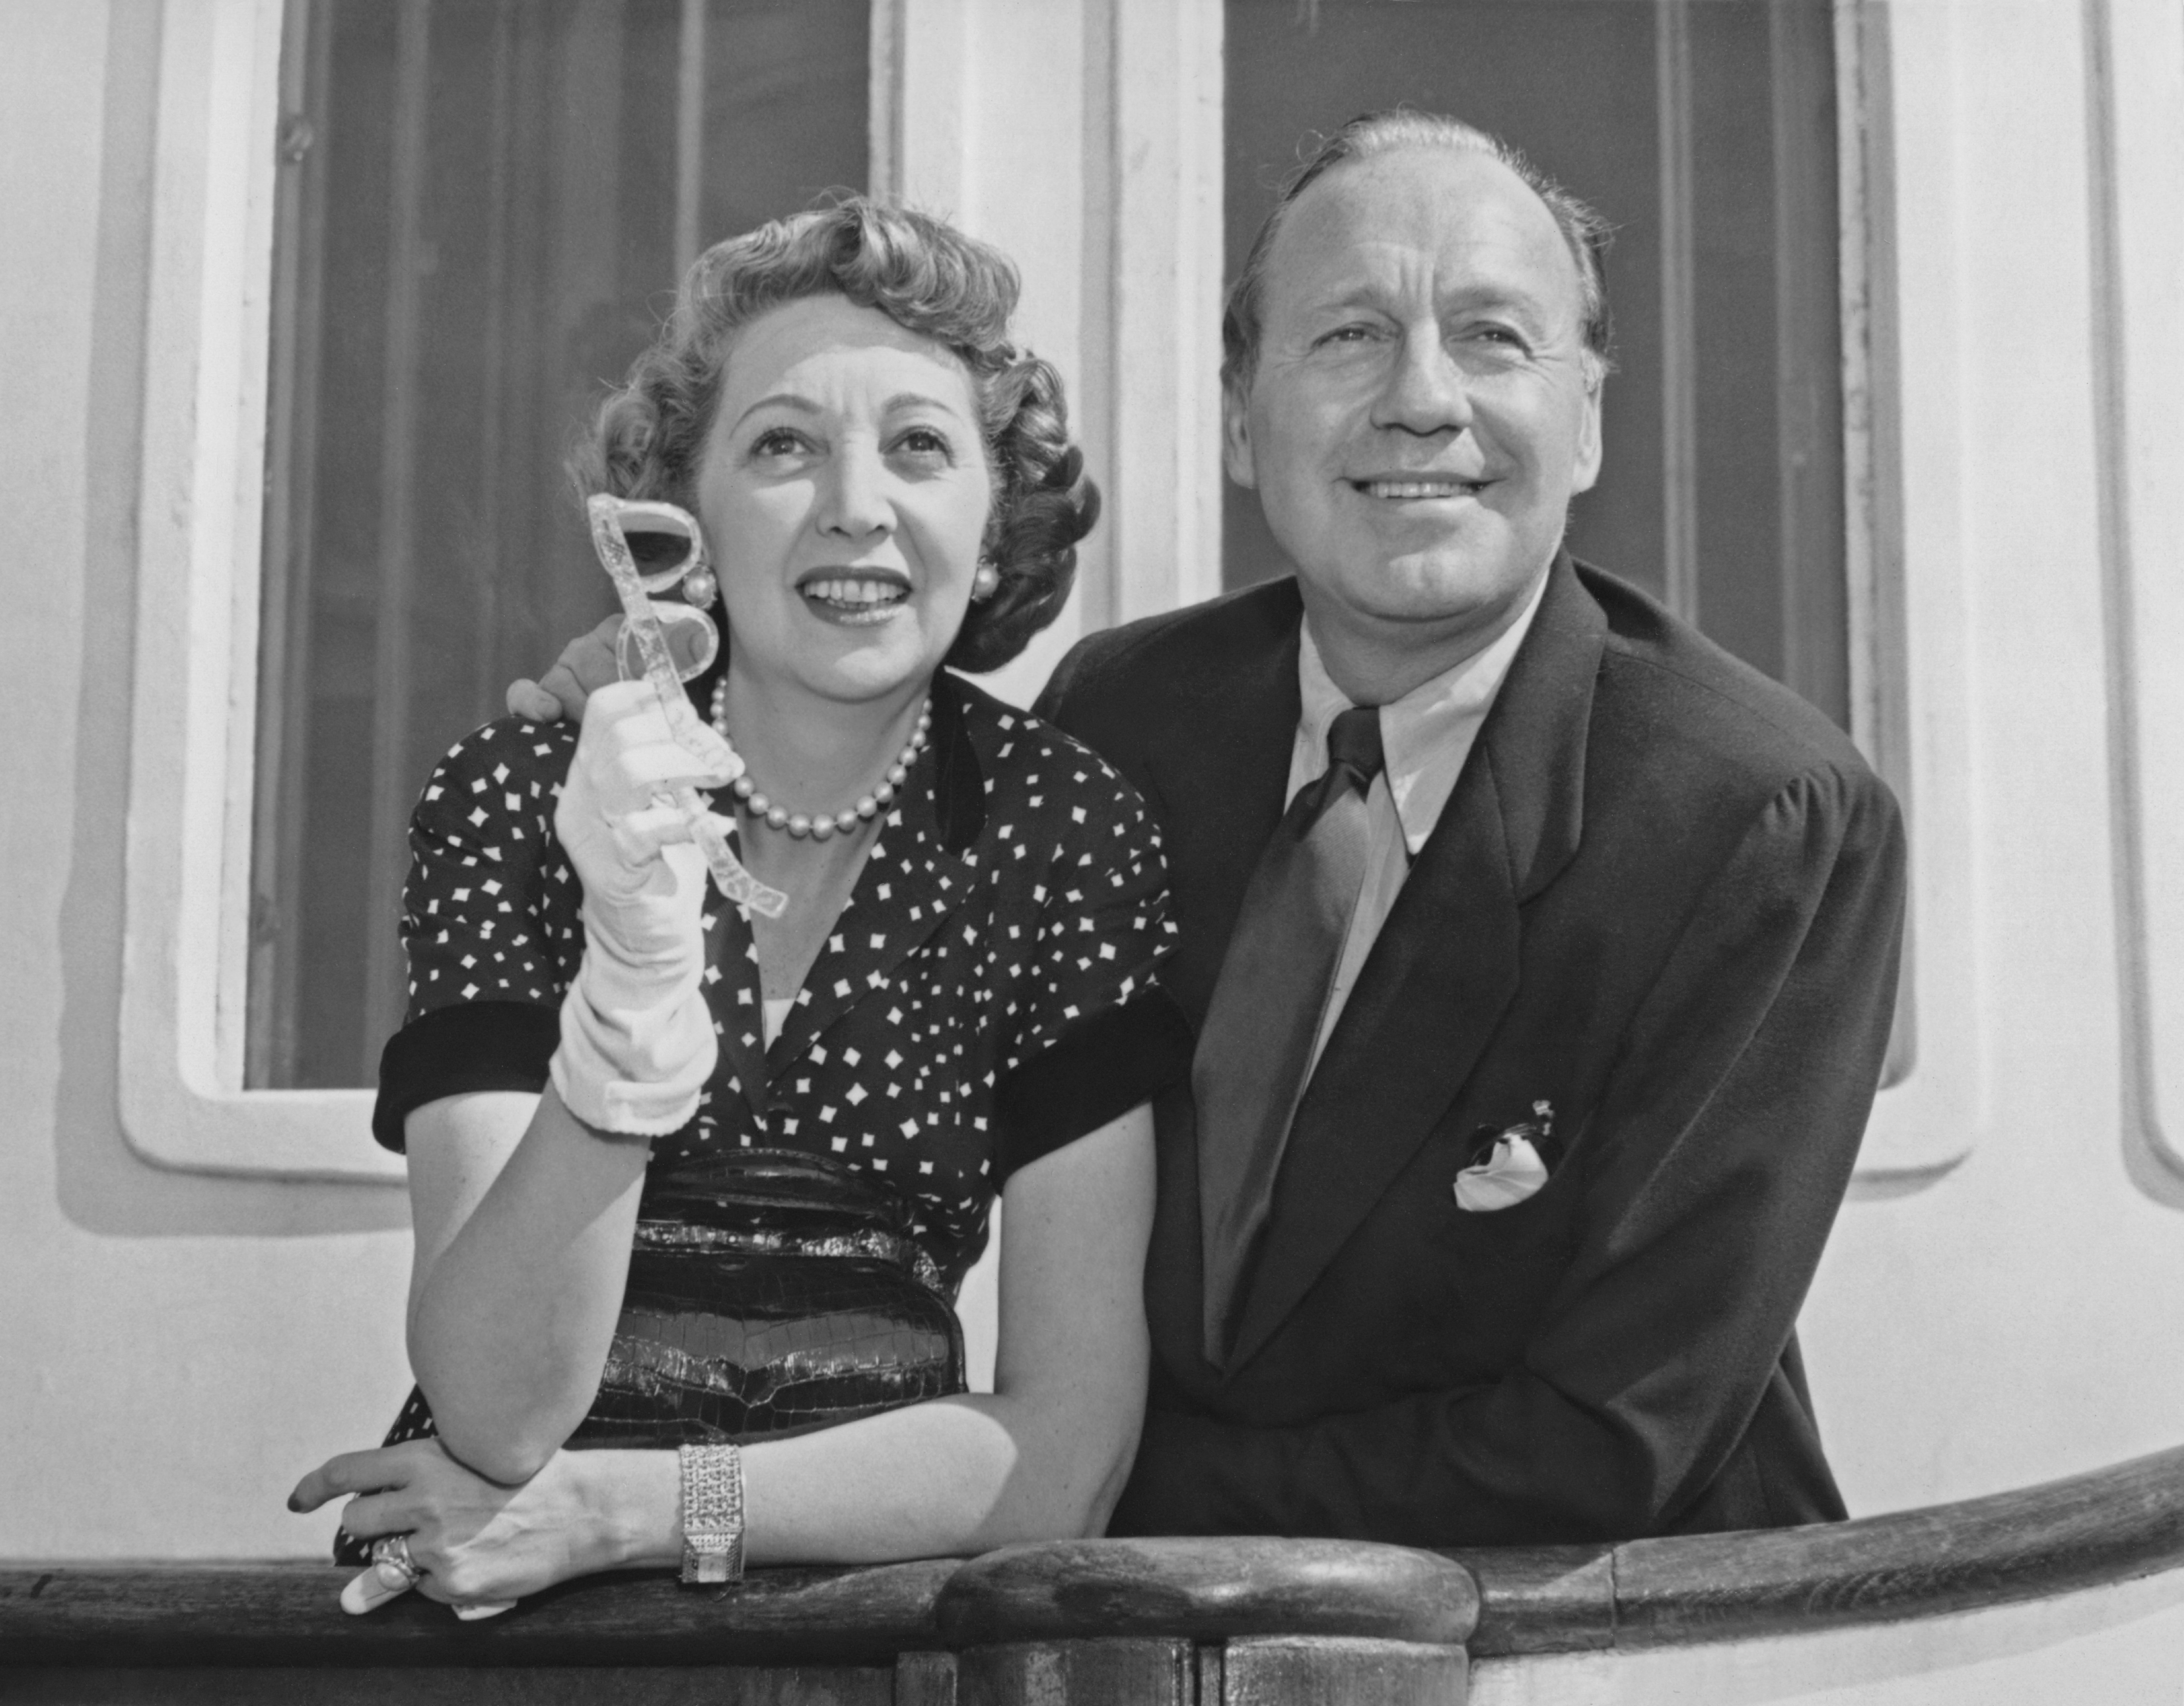 American comedian and actor Jack Benny (1894 - 1974) and his wife Mary Livingstone (1905 - 1983) circa 1952. | Source: Getty Images